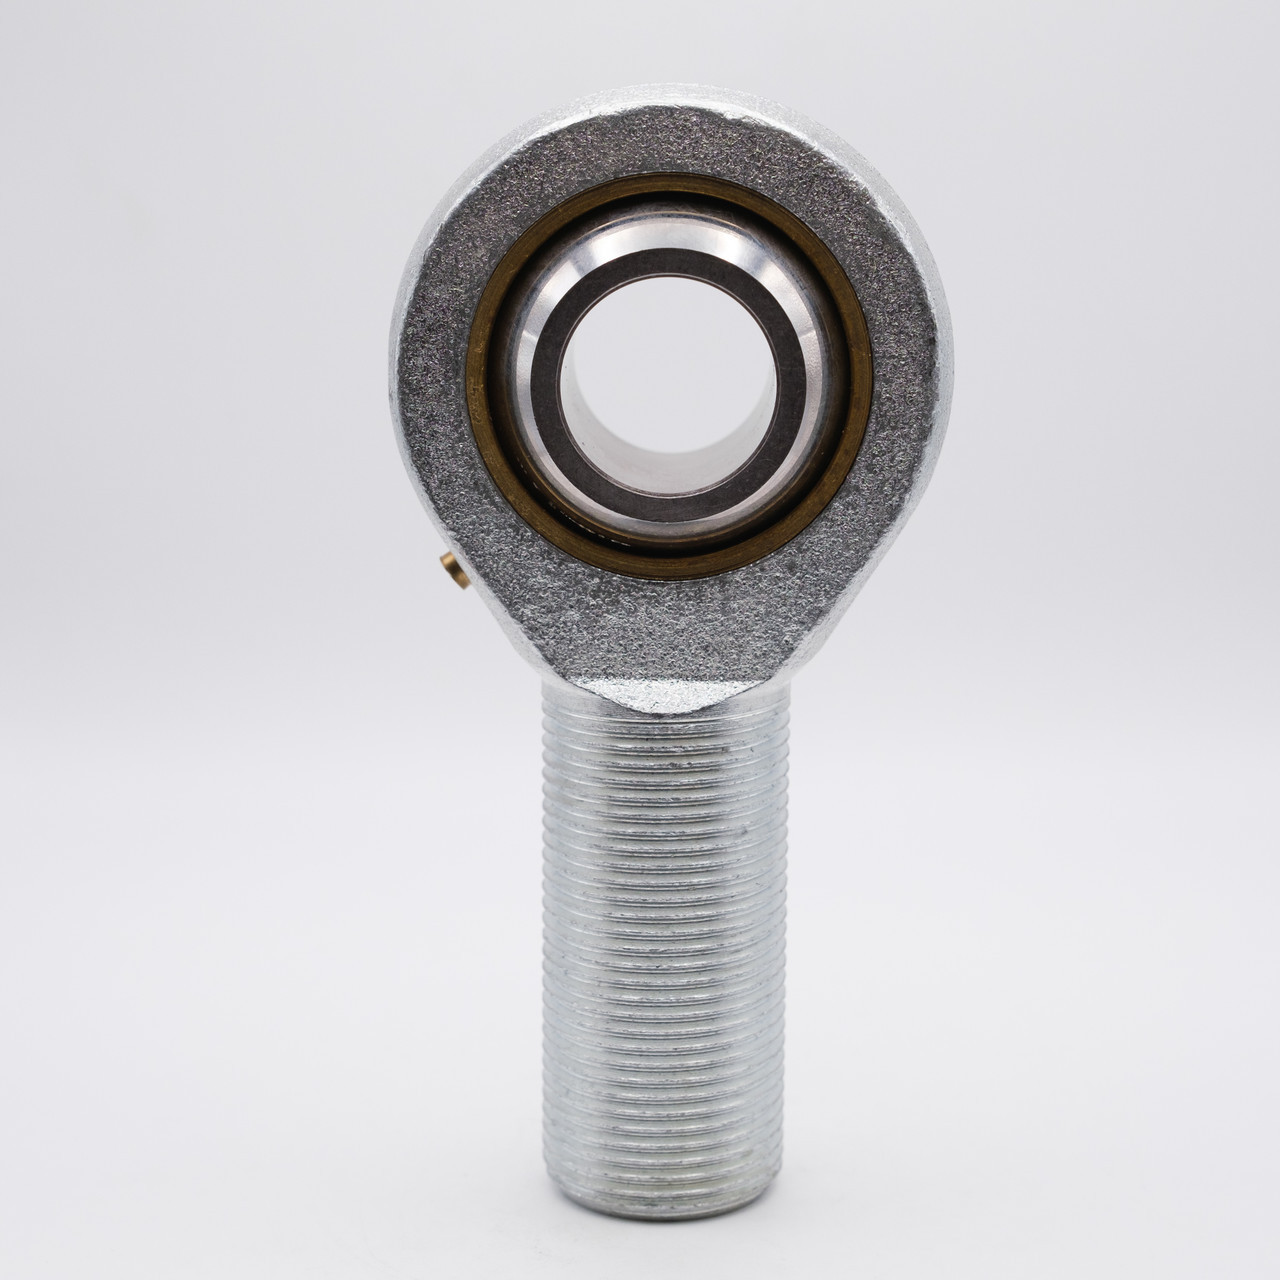 POS8 Rod-End Bearing 8mm Bore Front View